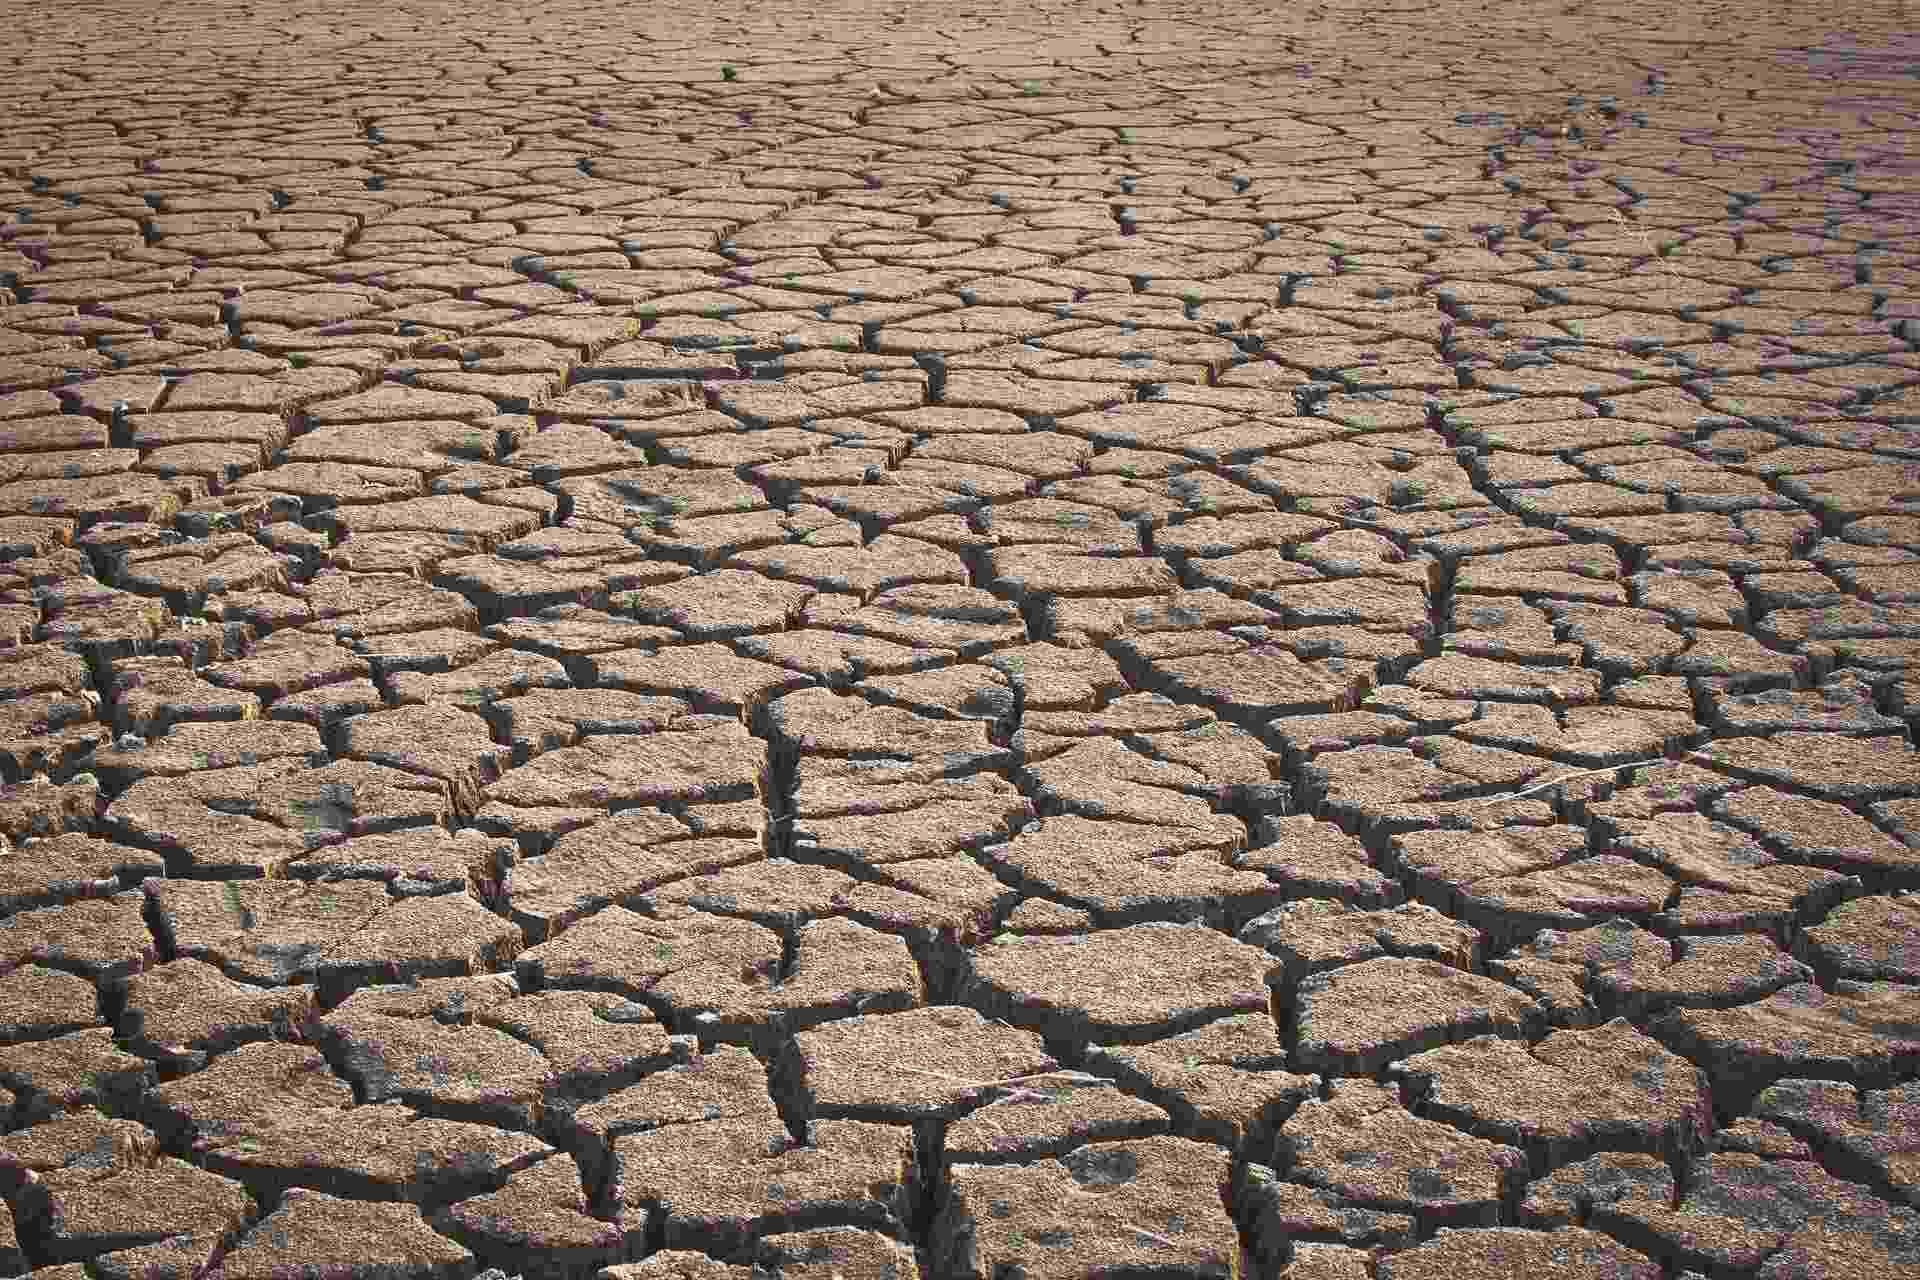 Close up of dry, cracked earth, parched from drought